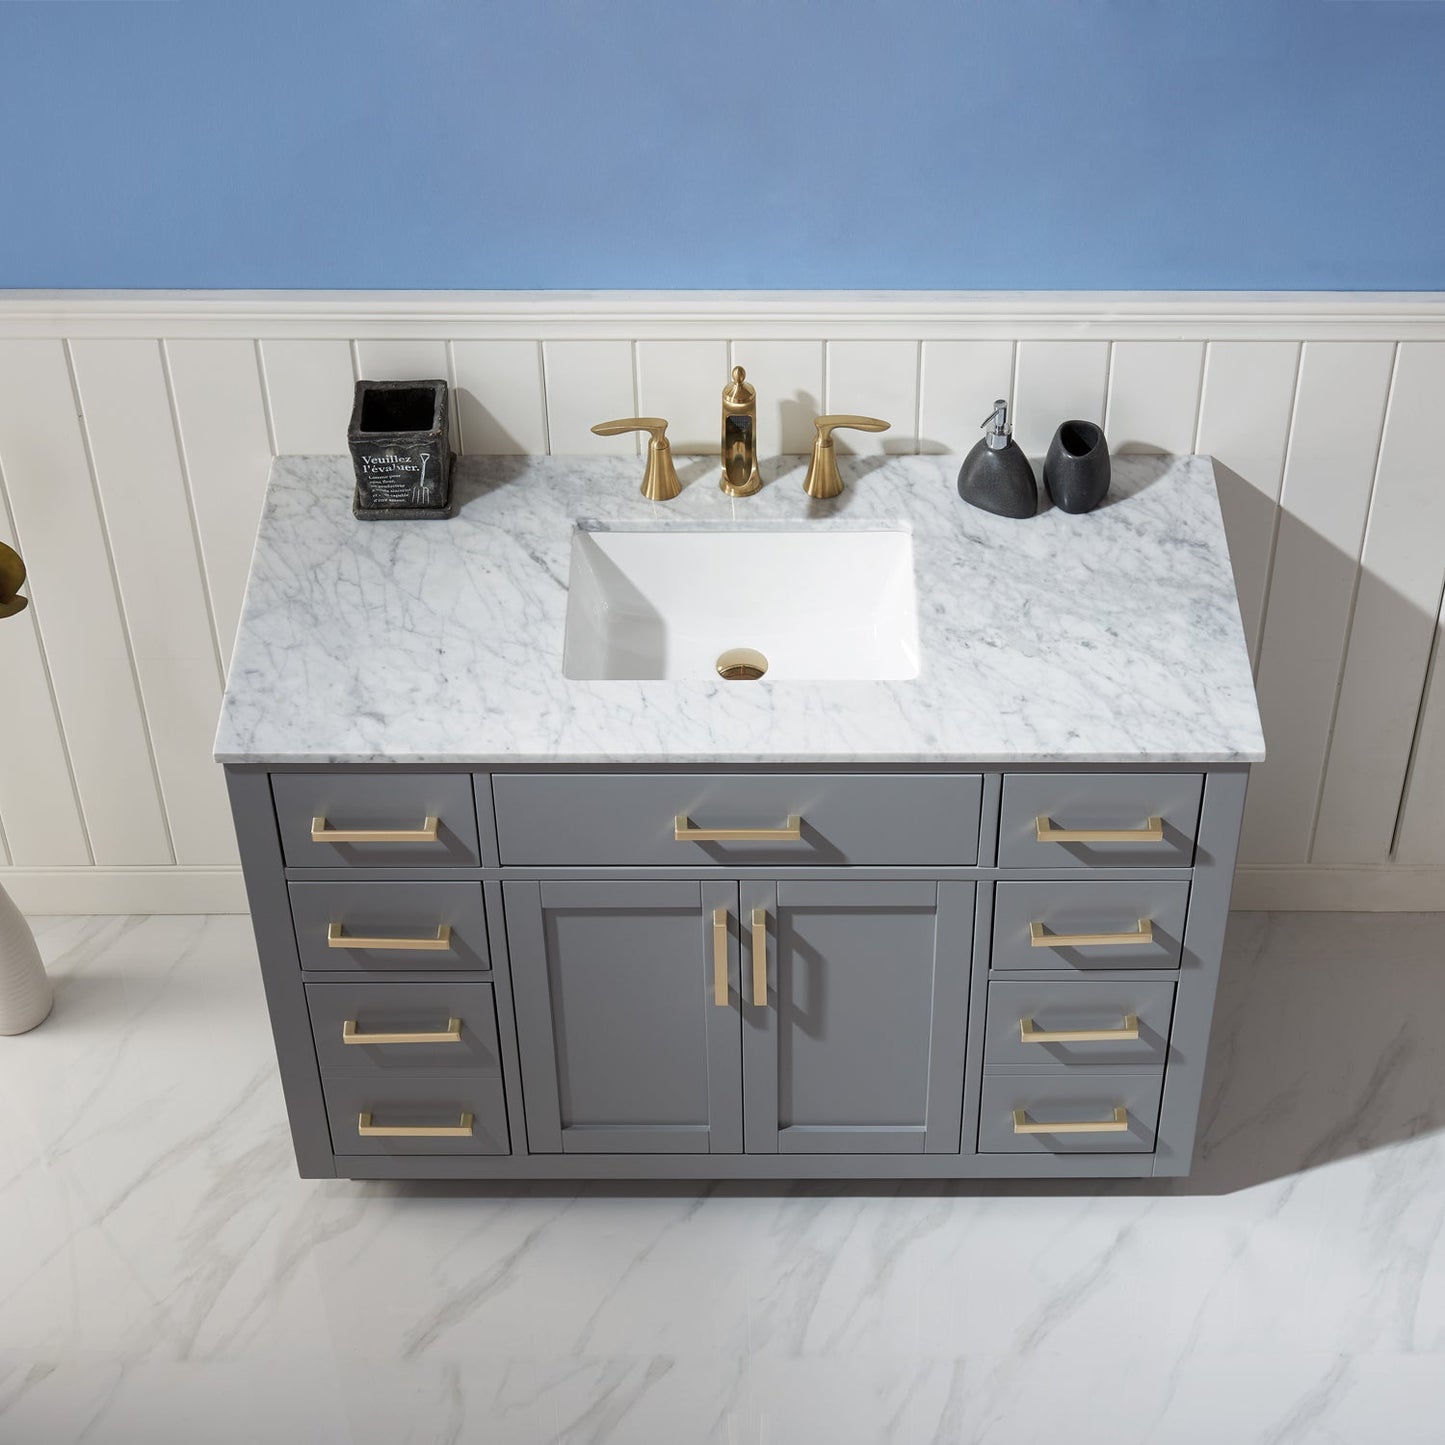 Ivy 48" Single Bathroom Vanity Set in Gray and Carrara White Marble Countertop without Mirror